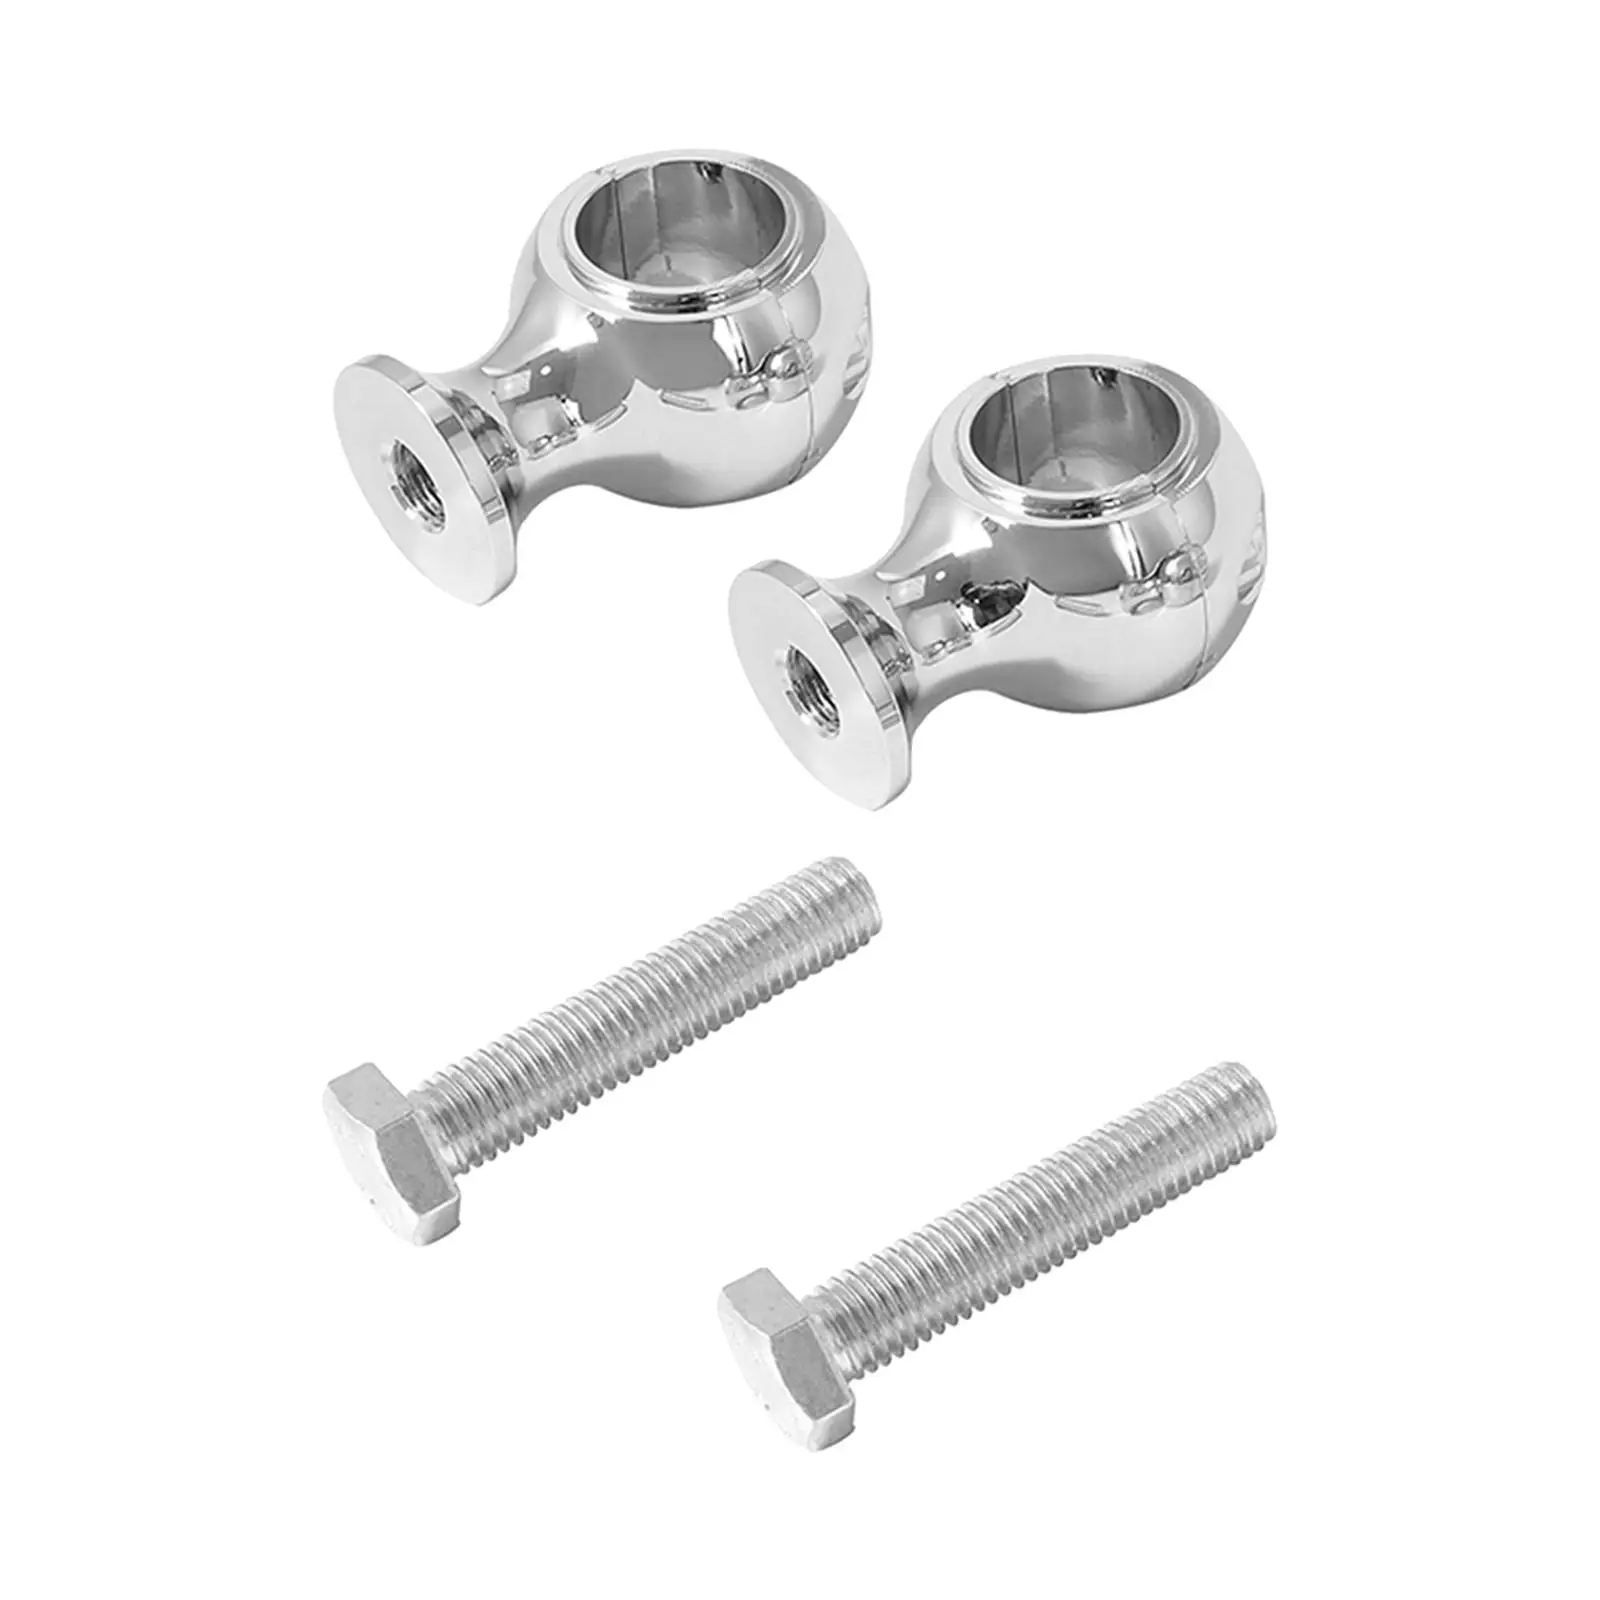 Motorcycle Handlebar Risers 25mm Heightening Mount High Professional Motorcycle Bar Mount Clamps for Harley